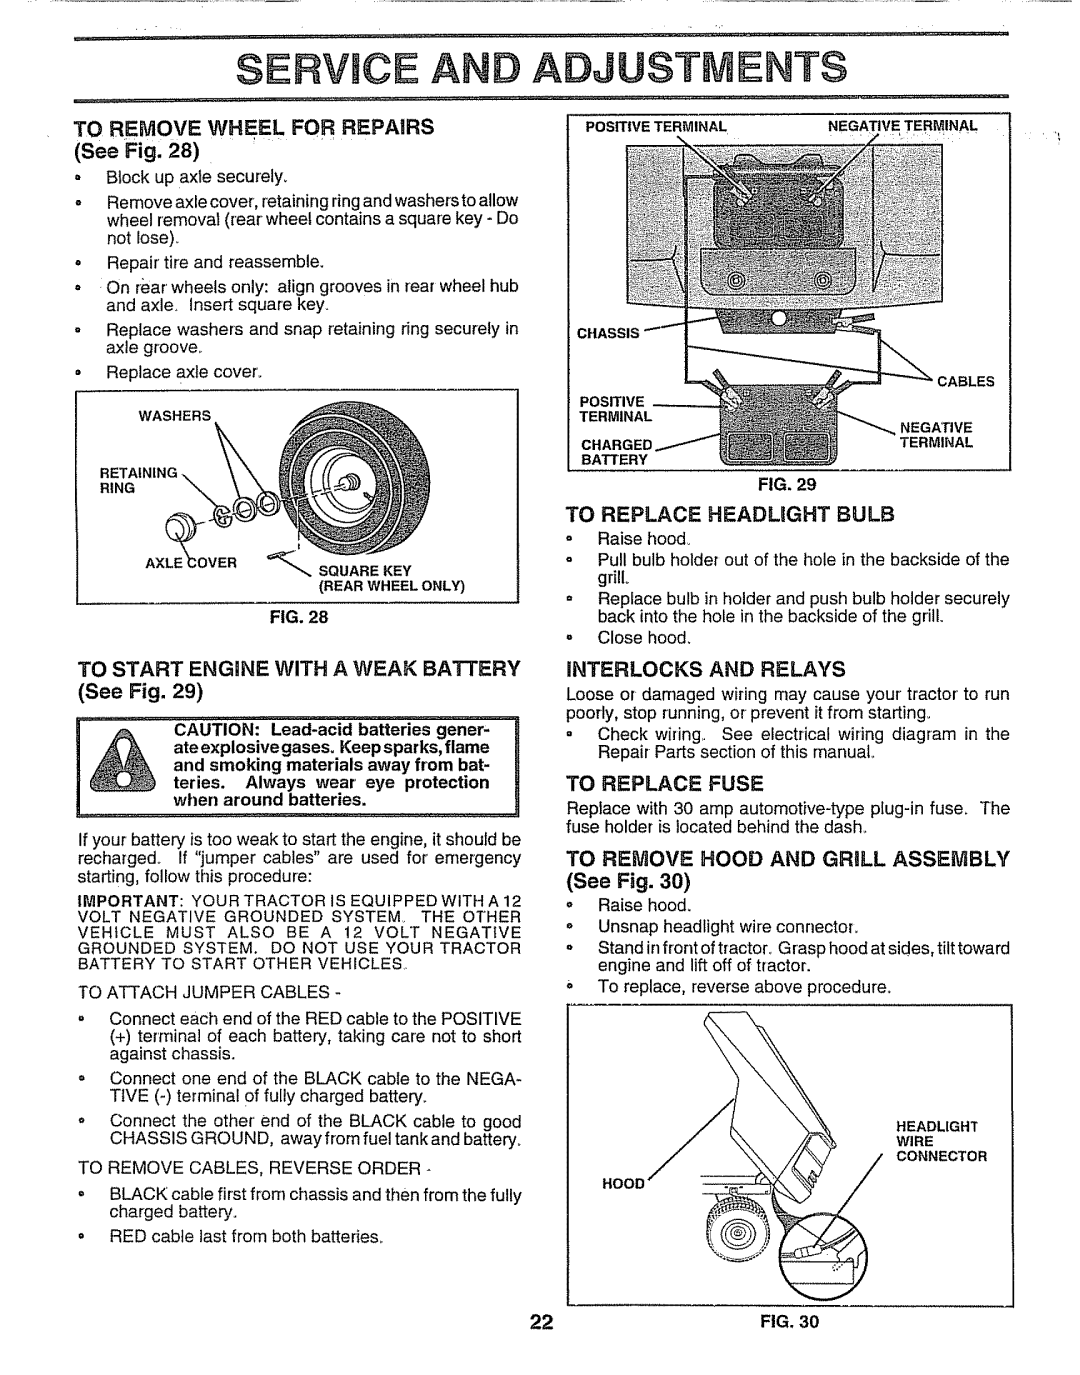 Sears 917.257552 Erv|Ce An Adjustments, TO REtVIOVE HOOD AND GRILL ASSEMBLY See Fig, TO REMOVE WHEEL FOR REPAIRS See Fig 